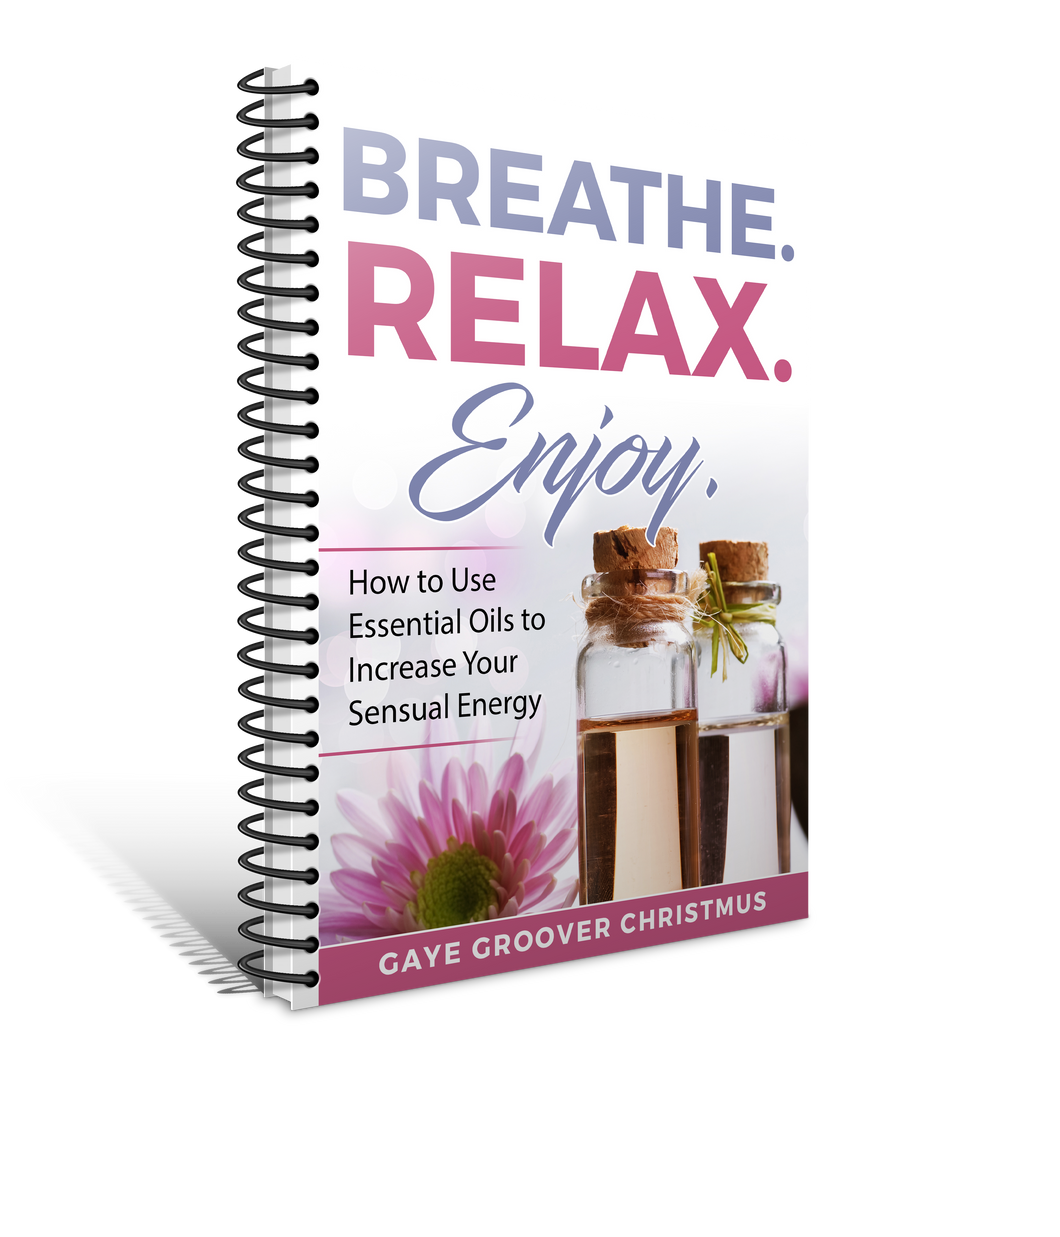 Breathe. Relax. Enjoy. How to Use Essential Oils to Increase Your Sensual Energy